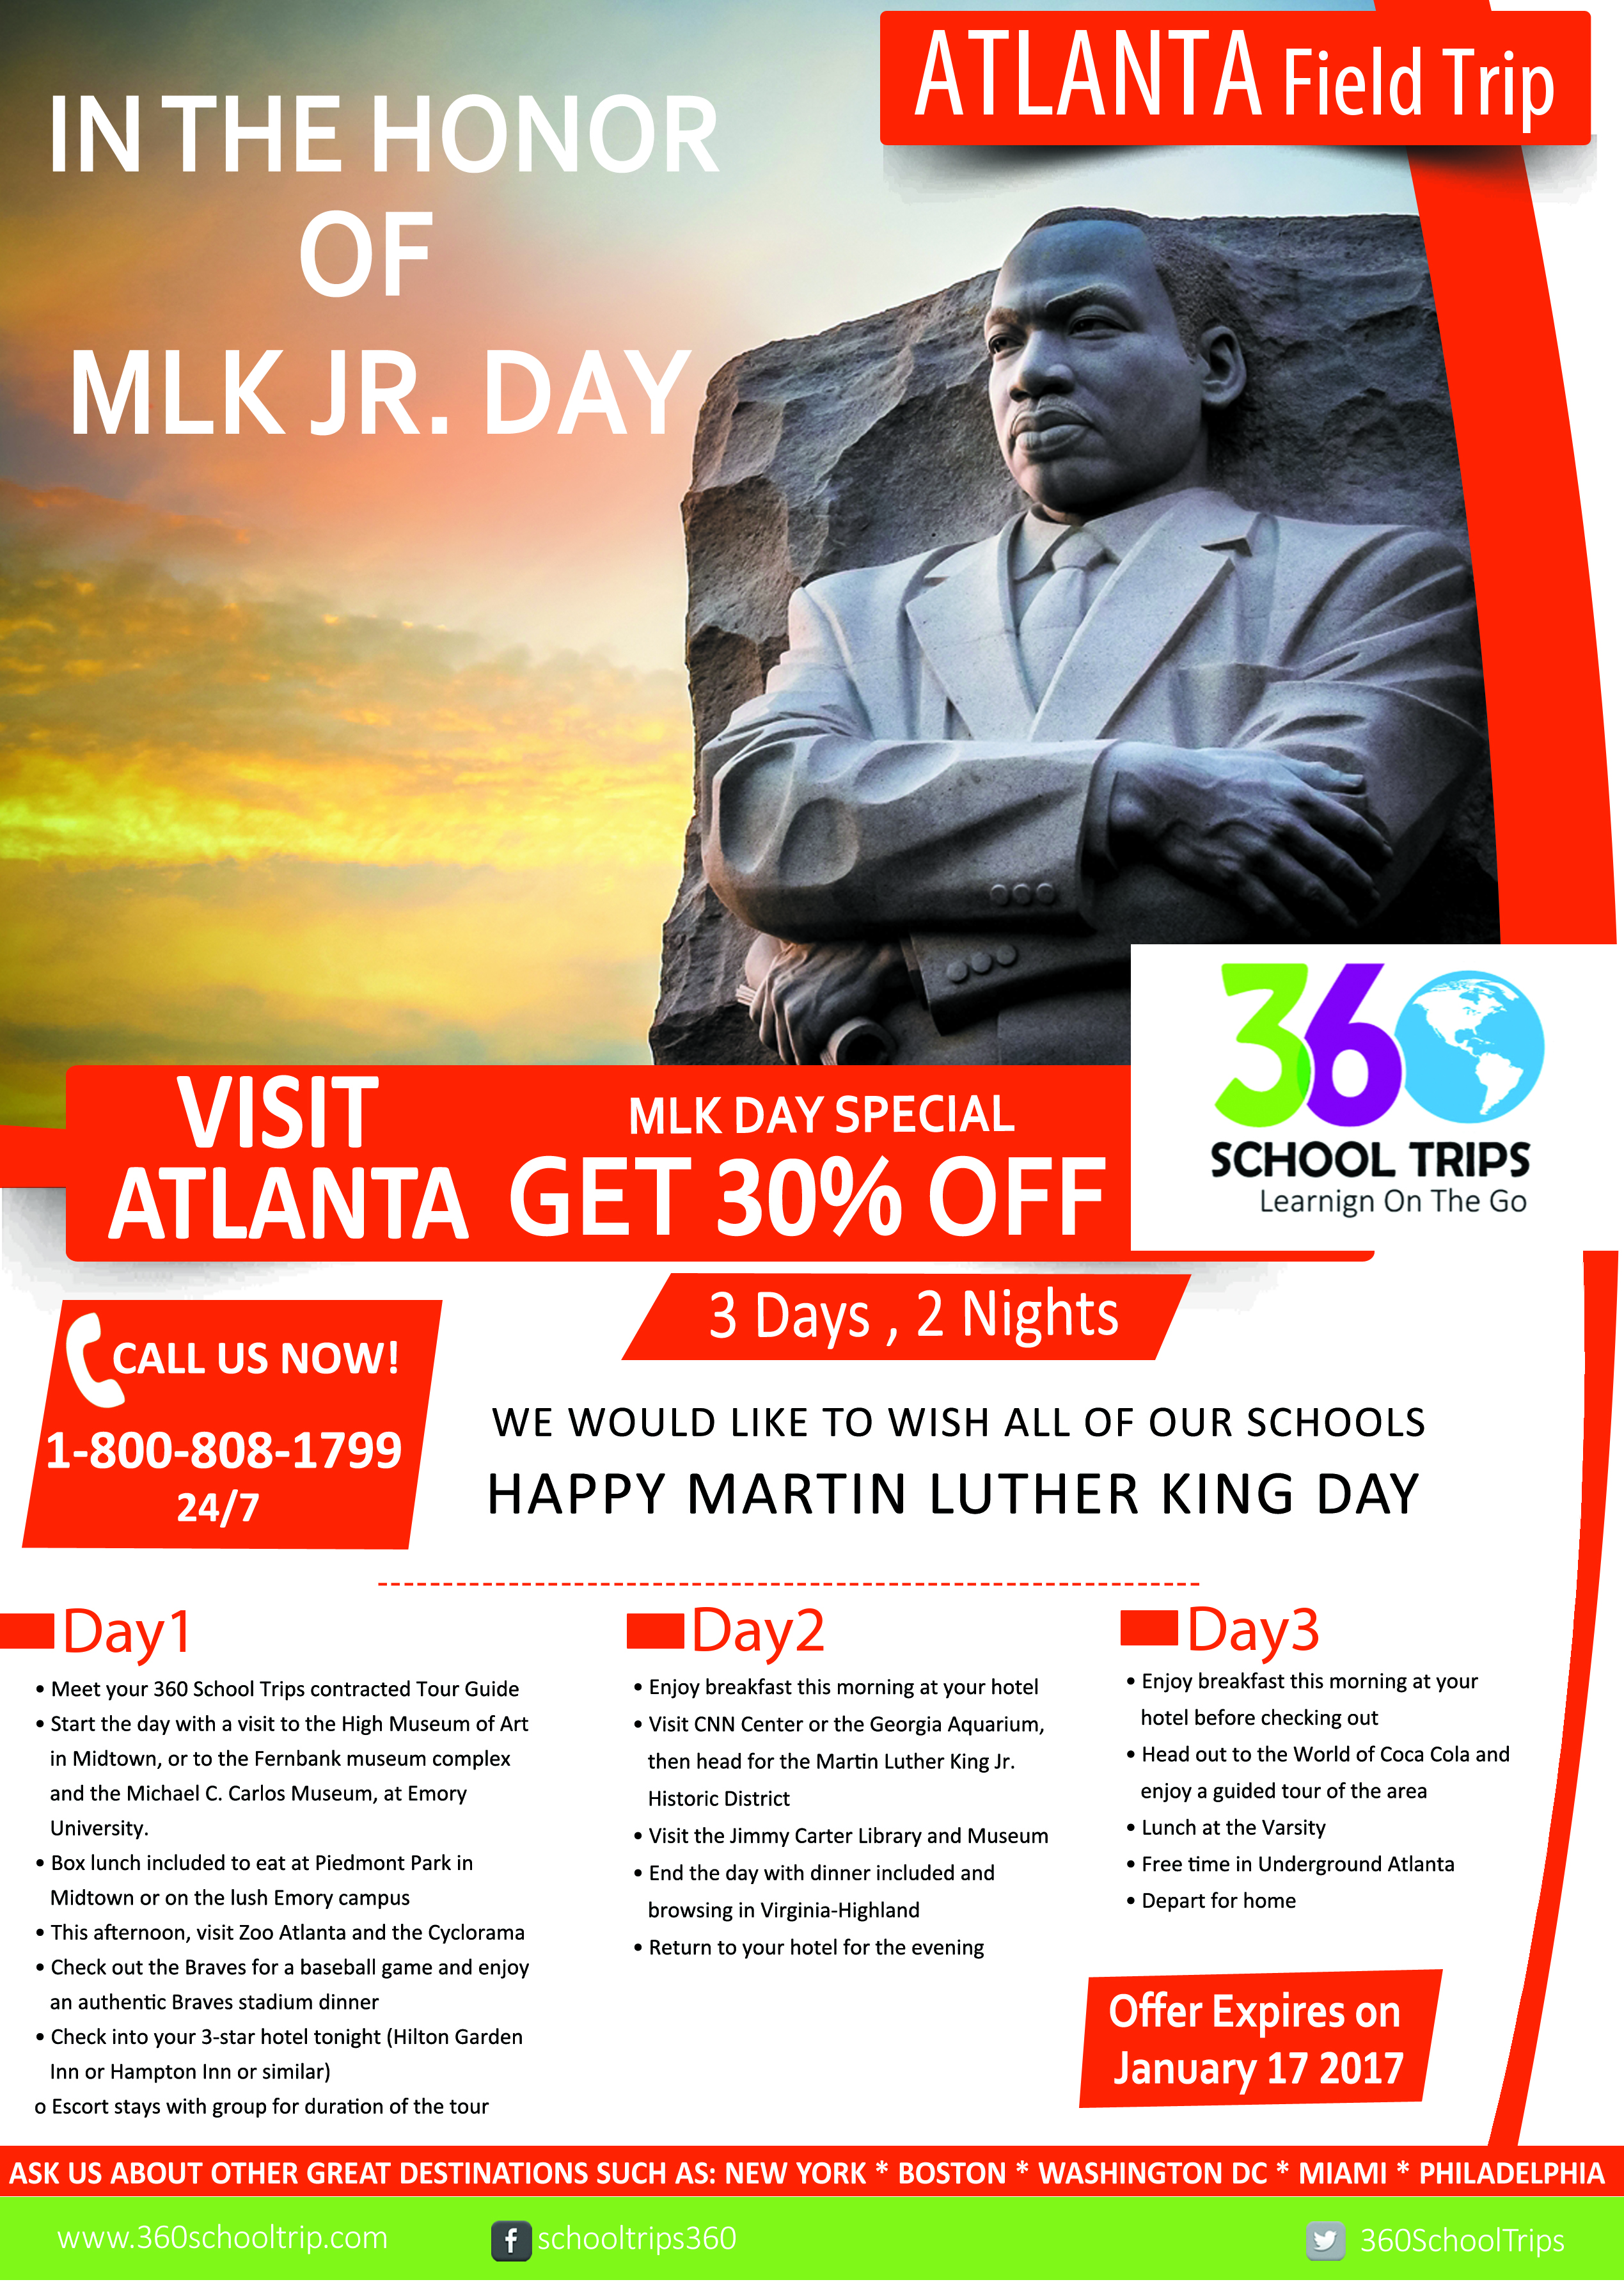 Martin Luther King Day Special Visit Atlanta Get 30% Off